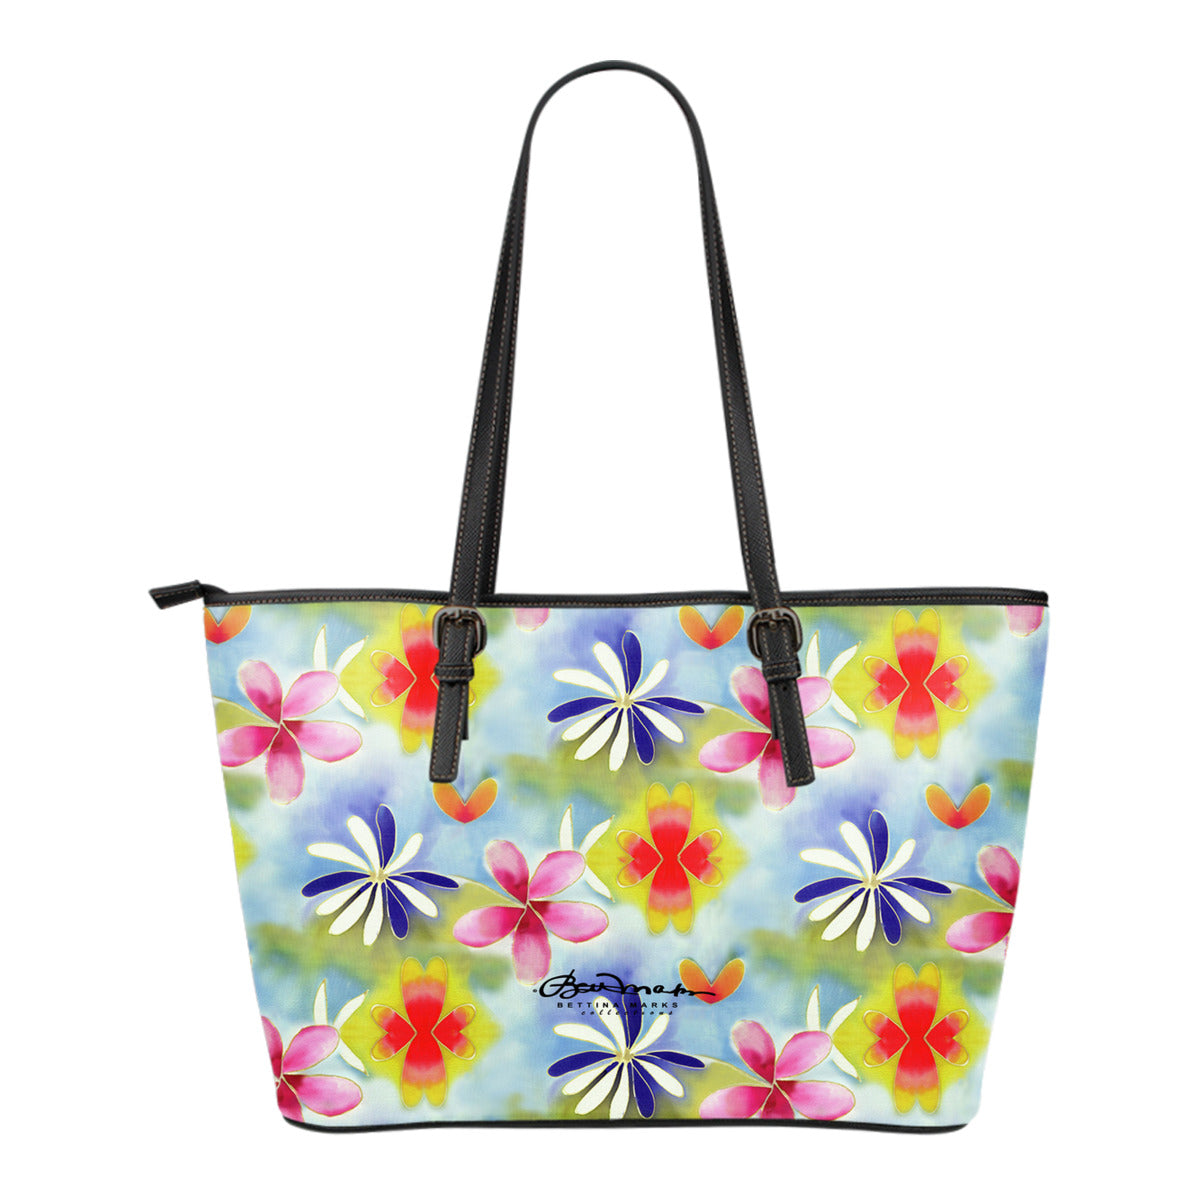 Sunrise Floral Small Tote Bag